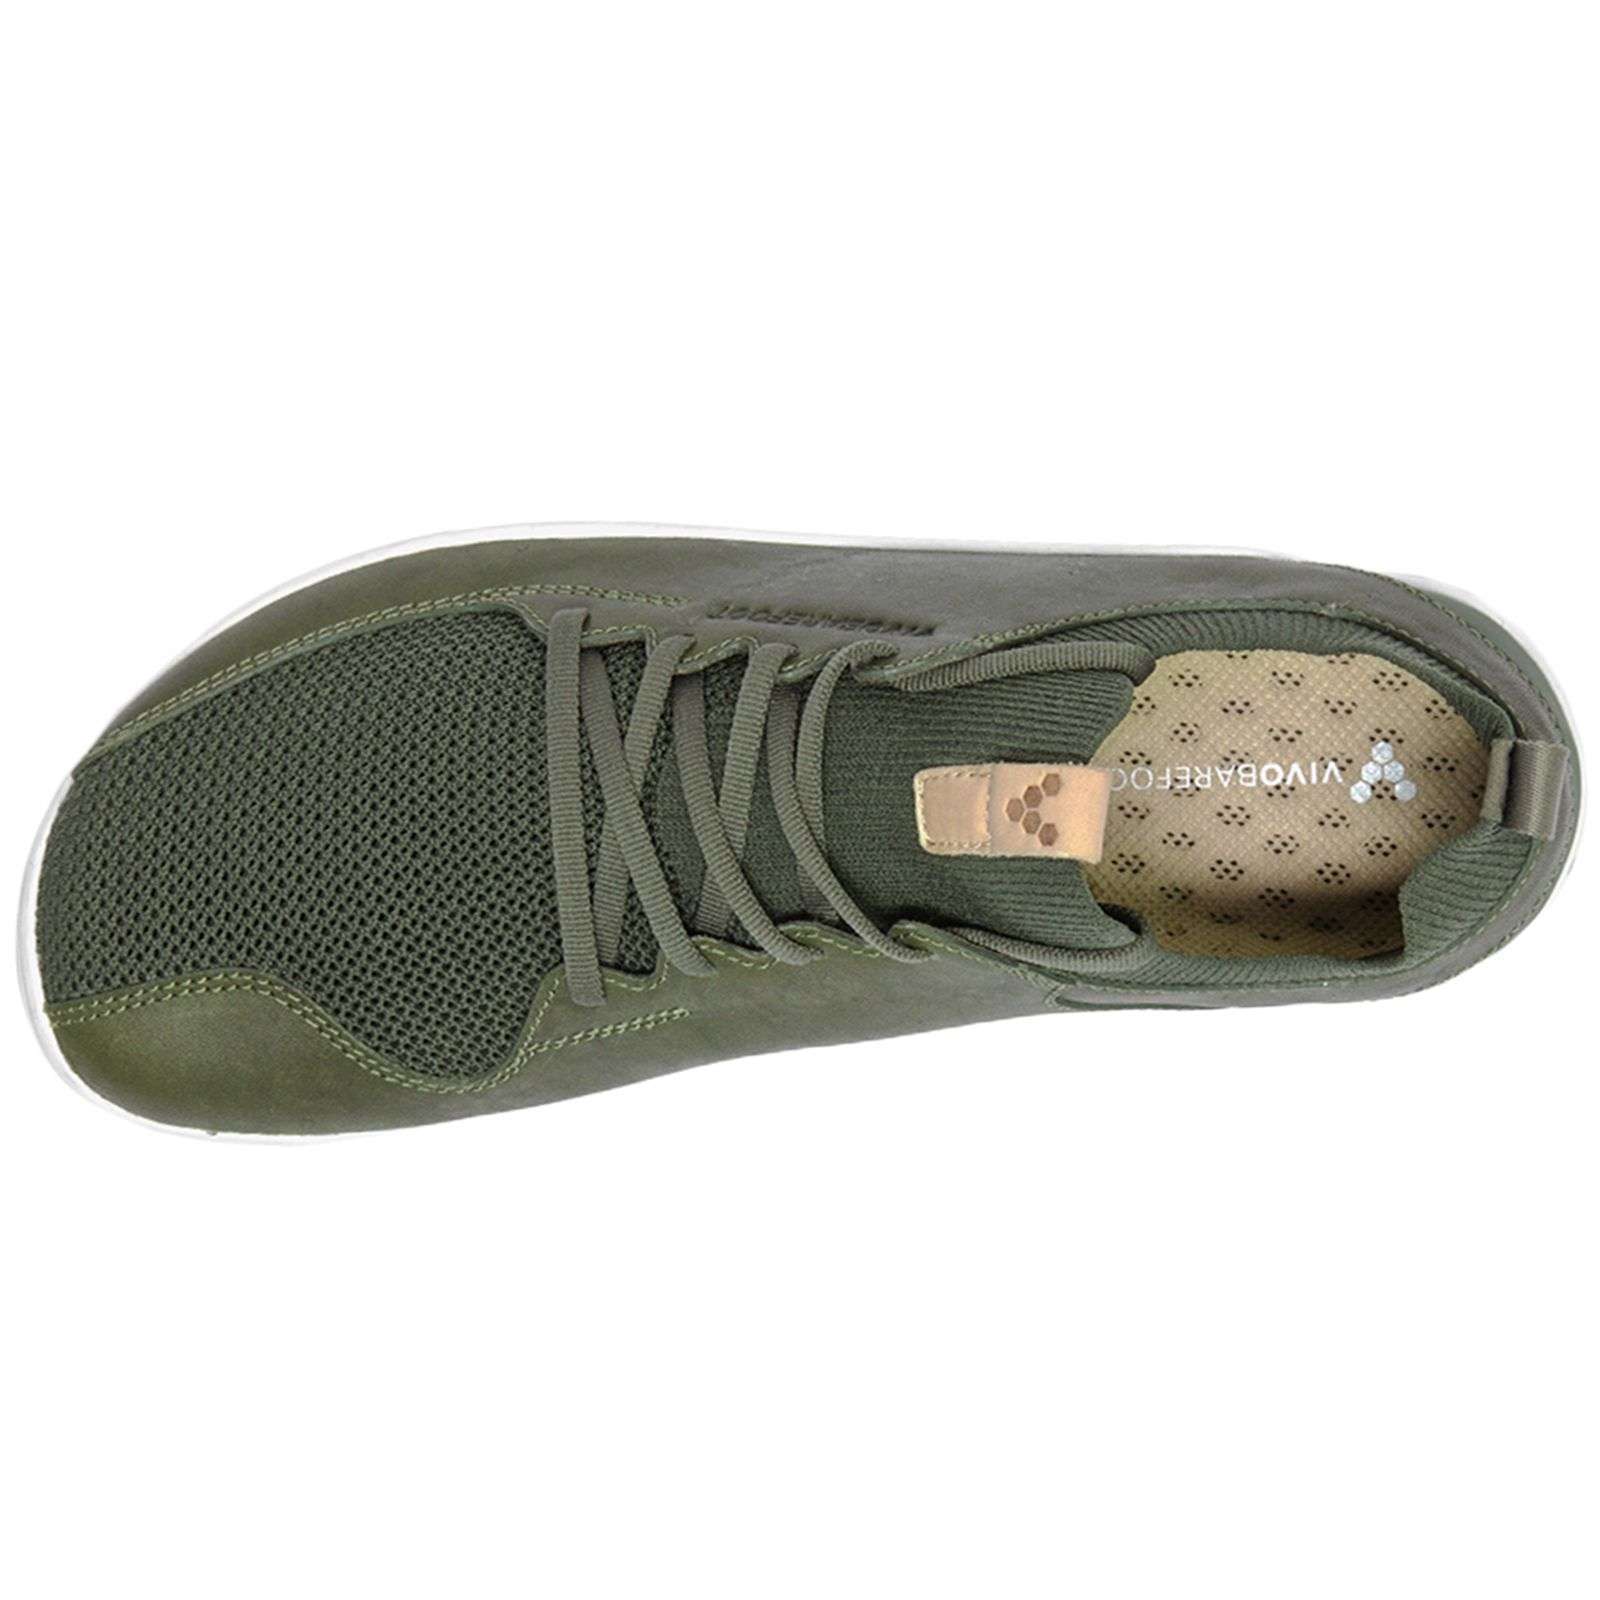 Vivobarefoot Primus Knit Leather Textile Womens Sneakers#color_olive green